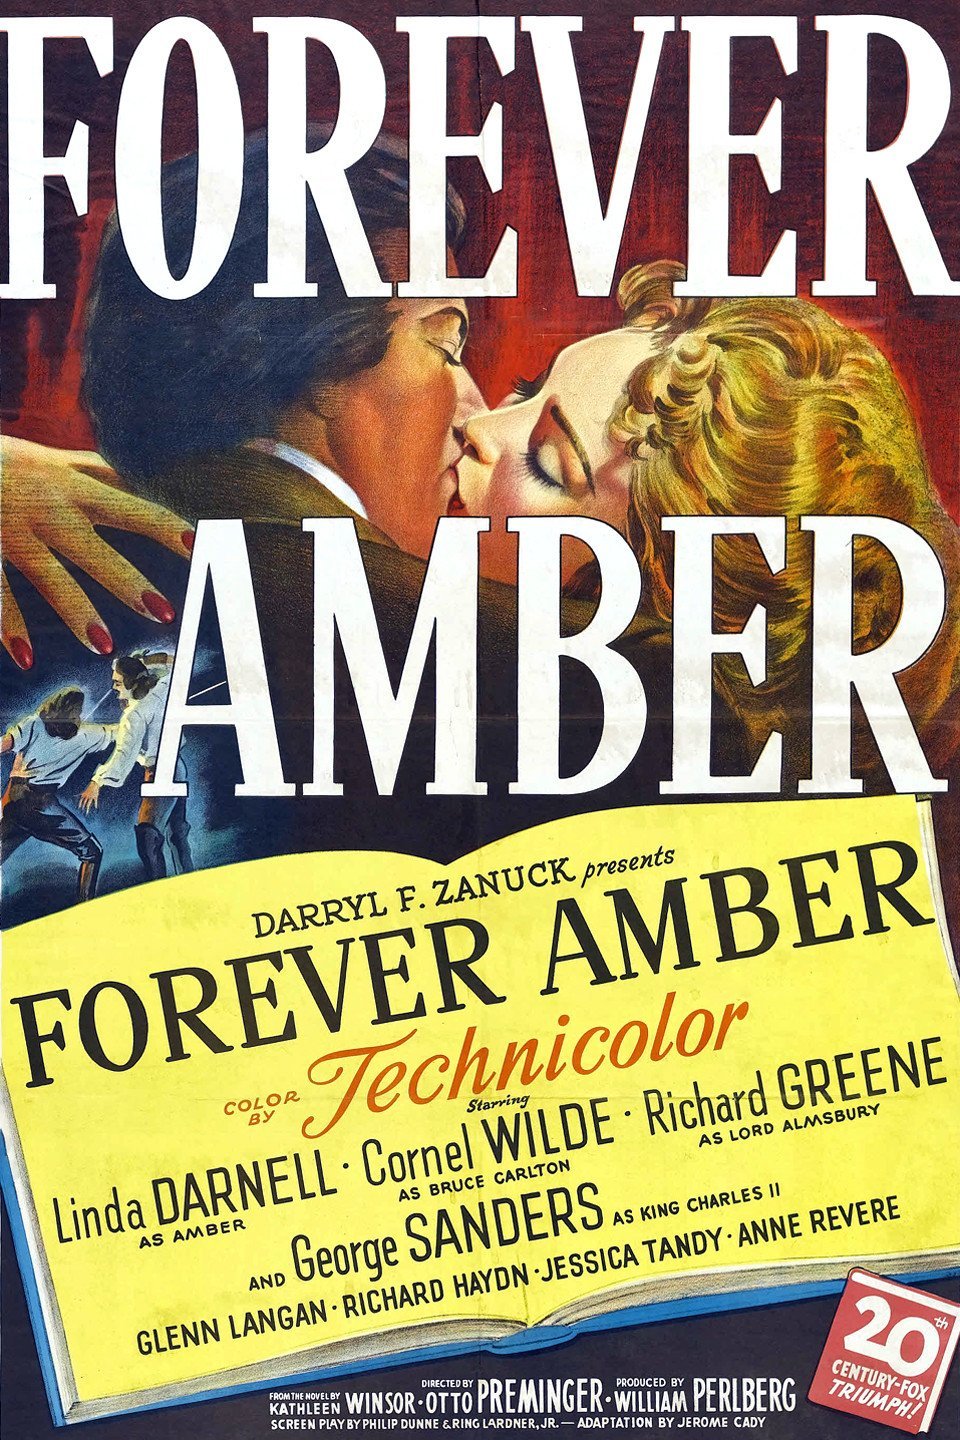 Poster of the movie Forever Amber